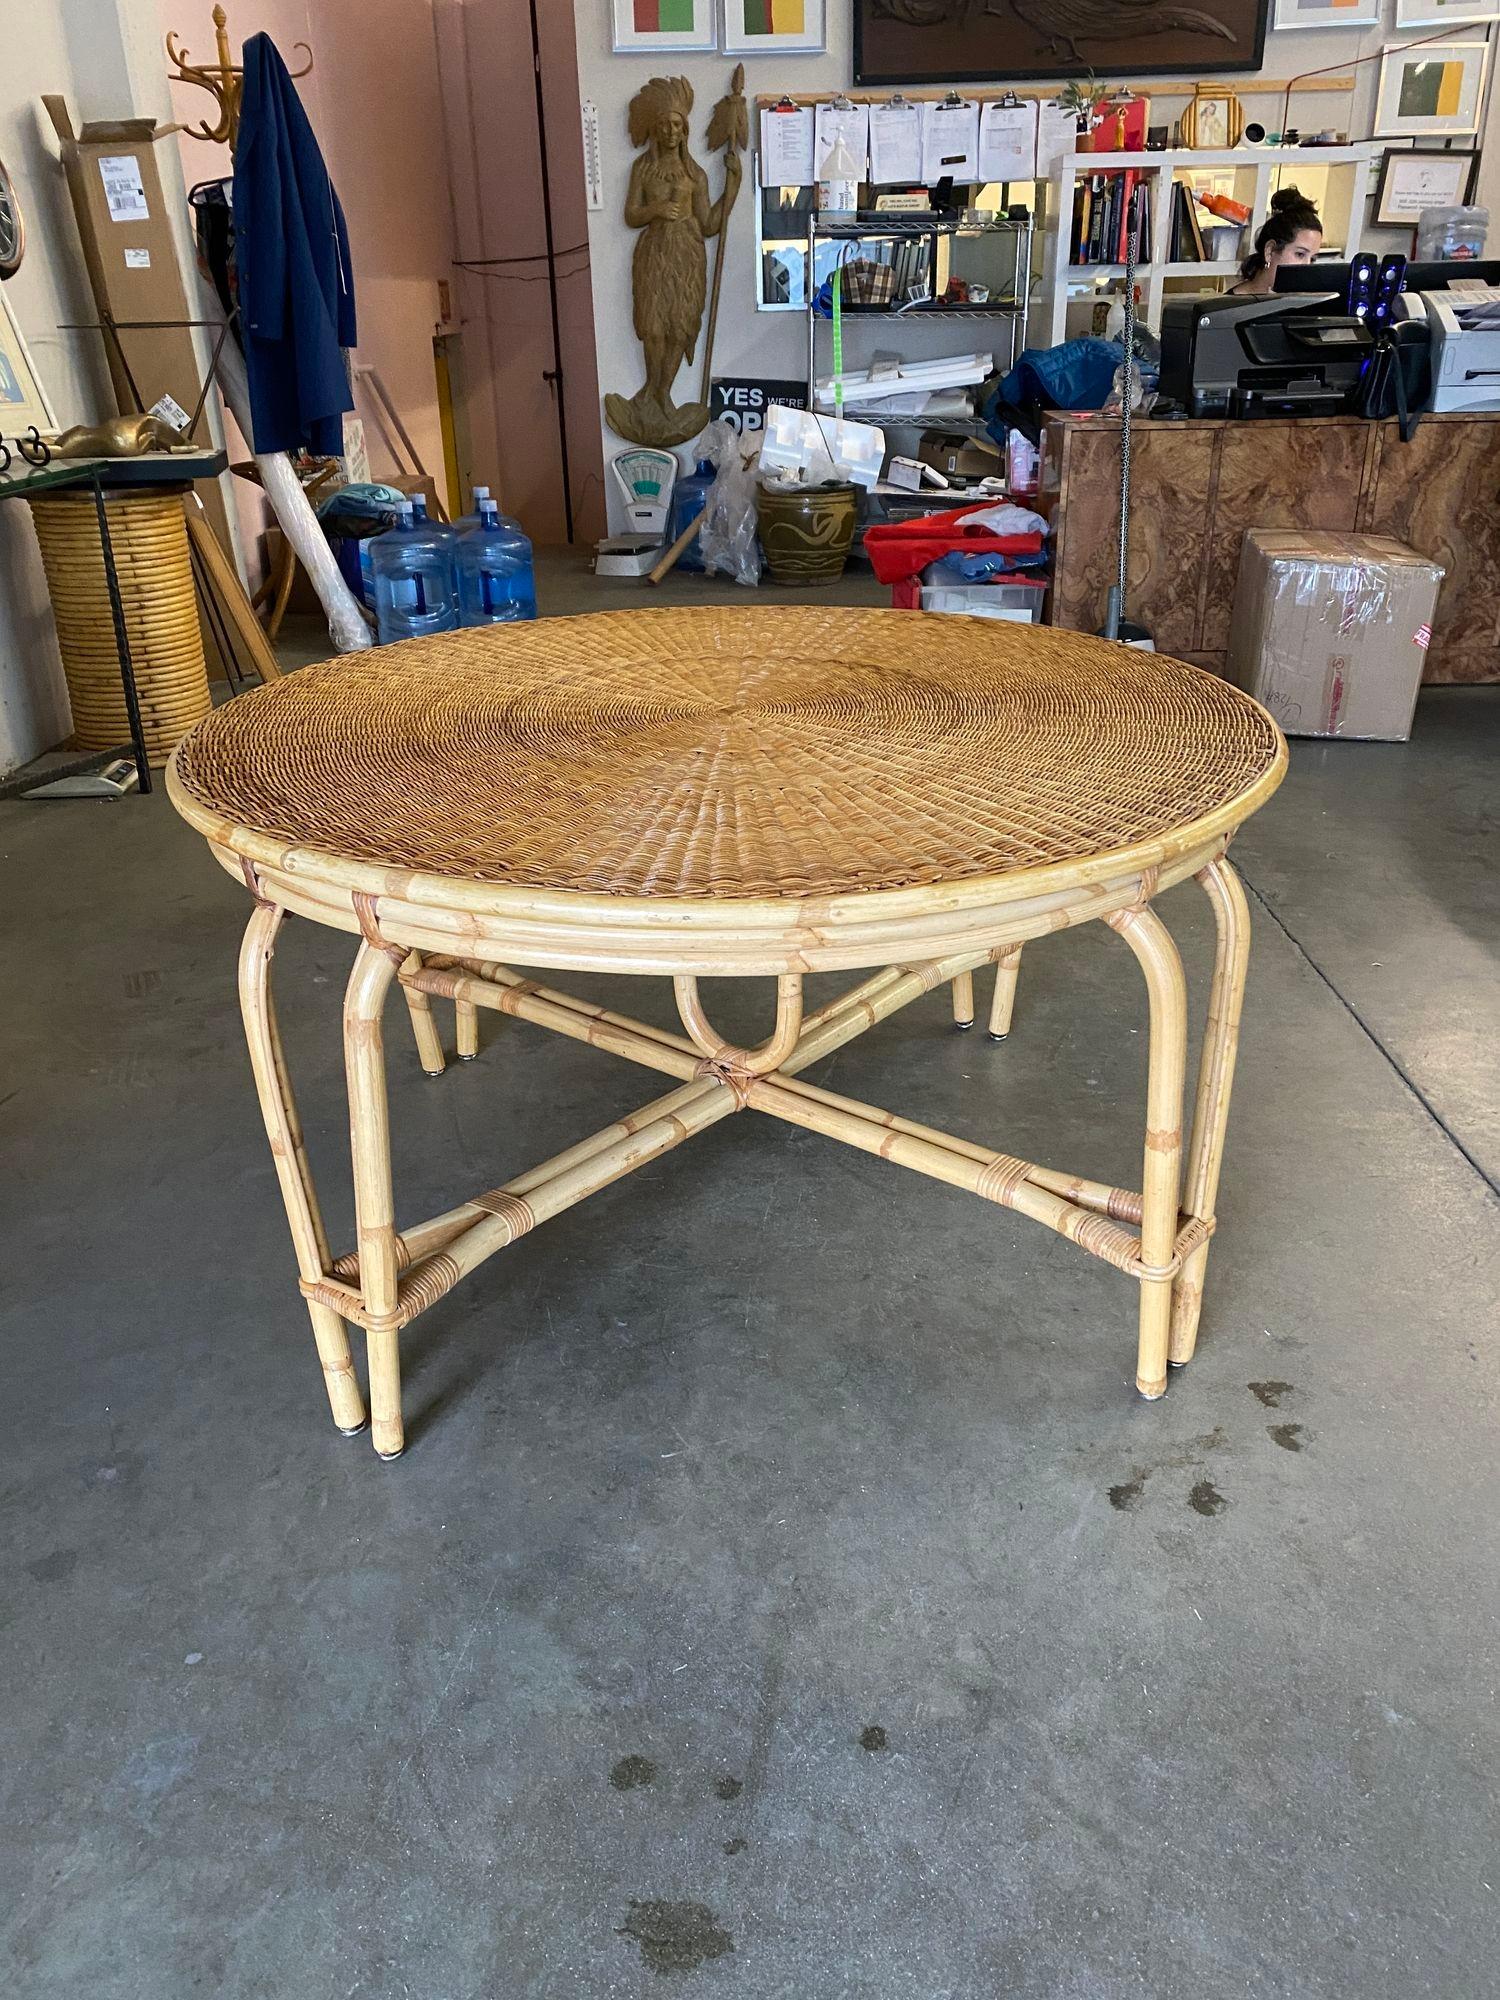 Round Wicker Top Rattan Table with Matching Stools Dining Set In Excellent Condition For Sale In Van Nuys, CA